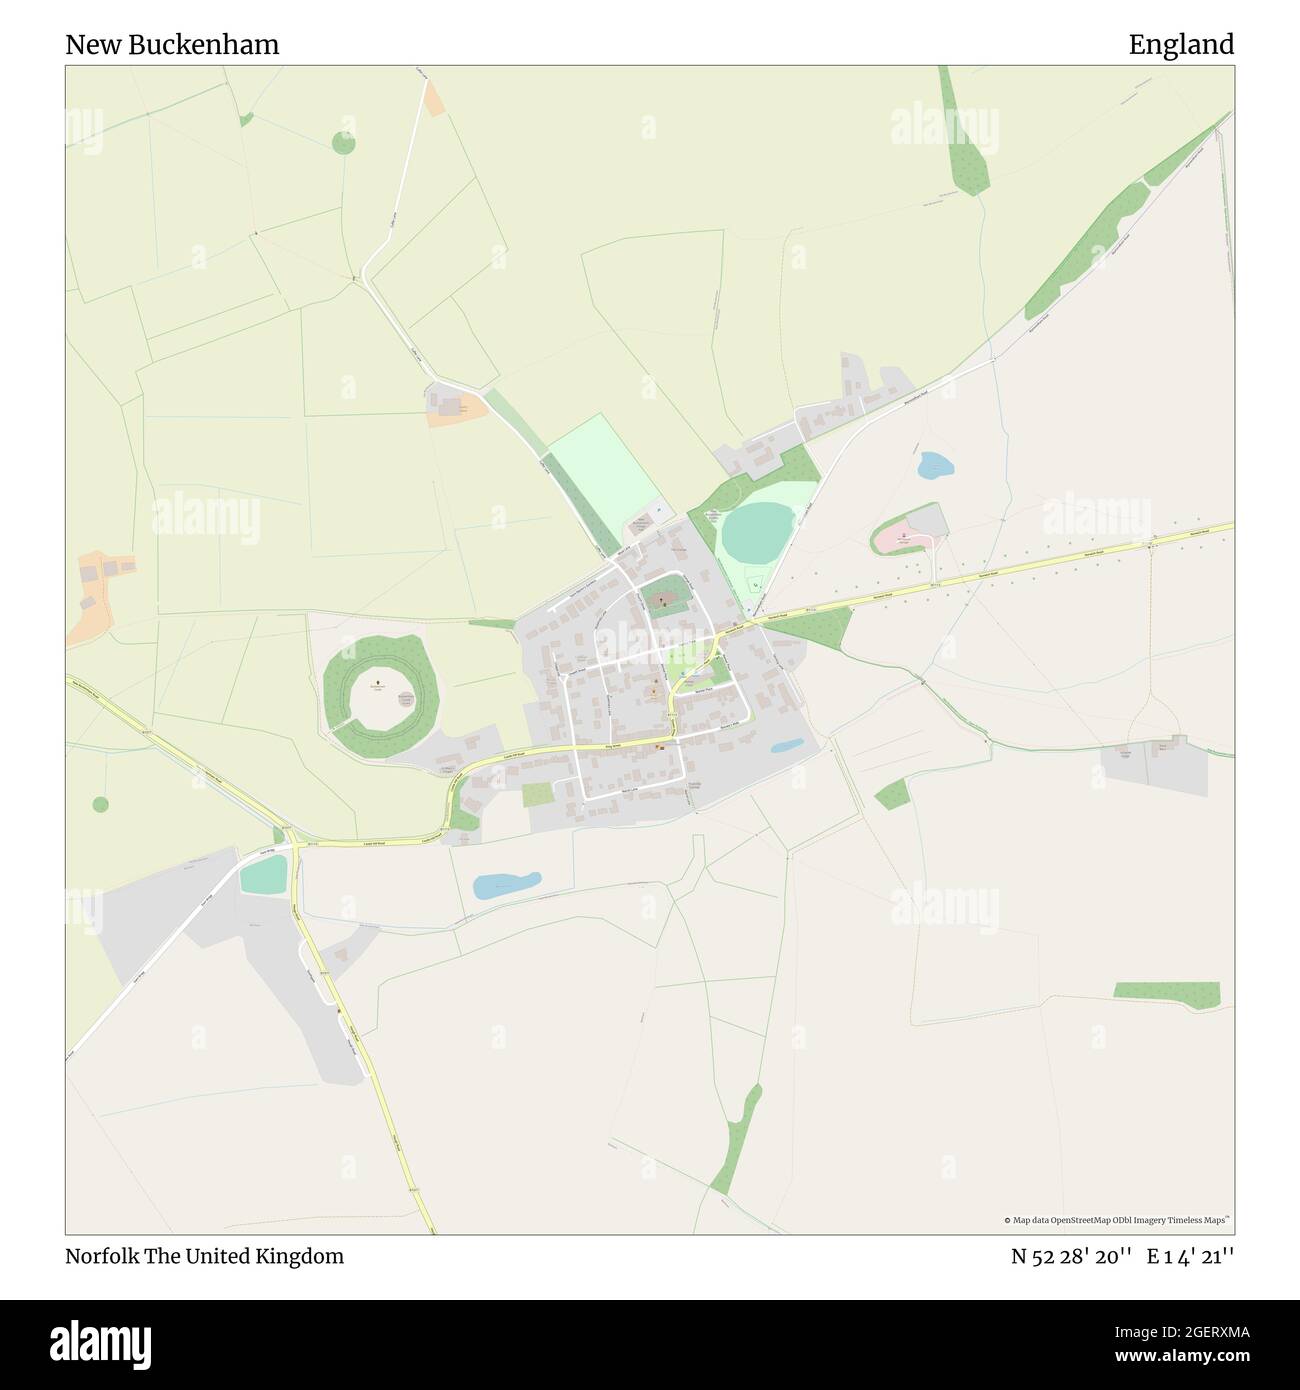 New Buckenham, Norfolk, United Kingdom, England, N 52 28' 20'', E 1 4' 21'', map, Timeless Map published in 2021. Travelers, explorers and adventurers like Florence Nightingale, David Livingstone, Ernest Shackleton, Lewis and Clark and Sherlock Holmes relied on maps to plan travels to the world's most remote corners, Timeless Maps is mapping most locations on the globe, showing the achievement of great dreams Stock Photo